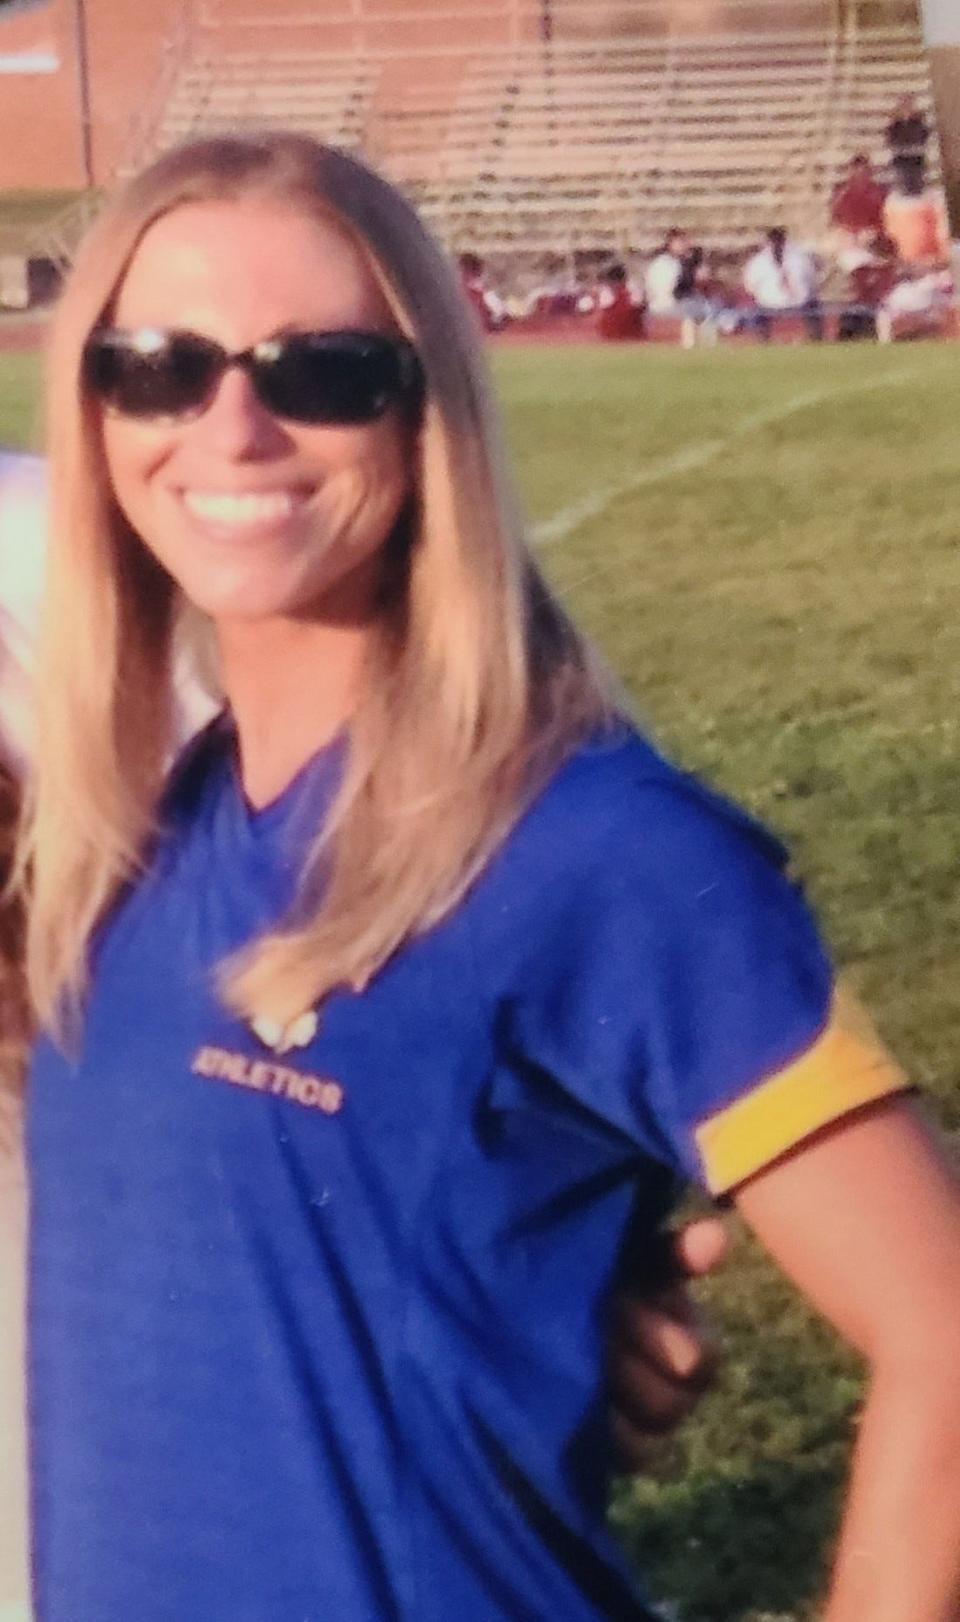 Denise (Ritchie) Fields will be inducted into the Buena Regional Athletic Hall of Fame on Nov. 26